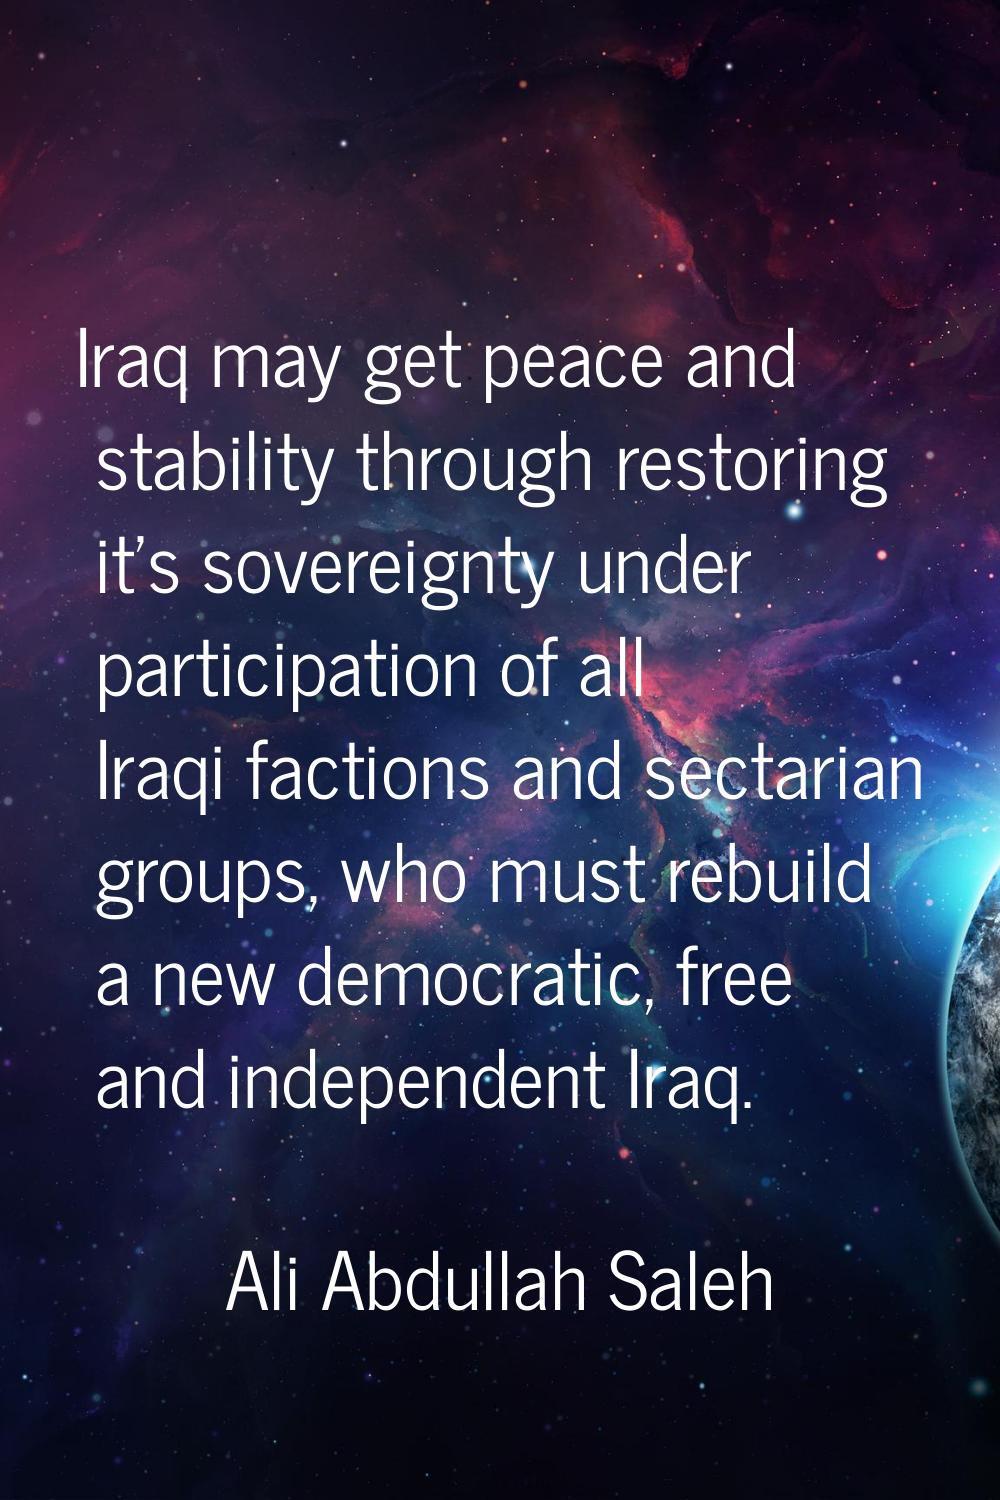 Iraq may get peace and stability through restoring it's sovereignty under participation of all Iraq